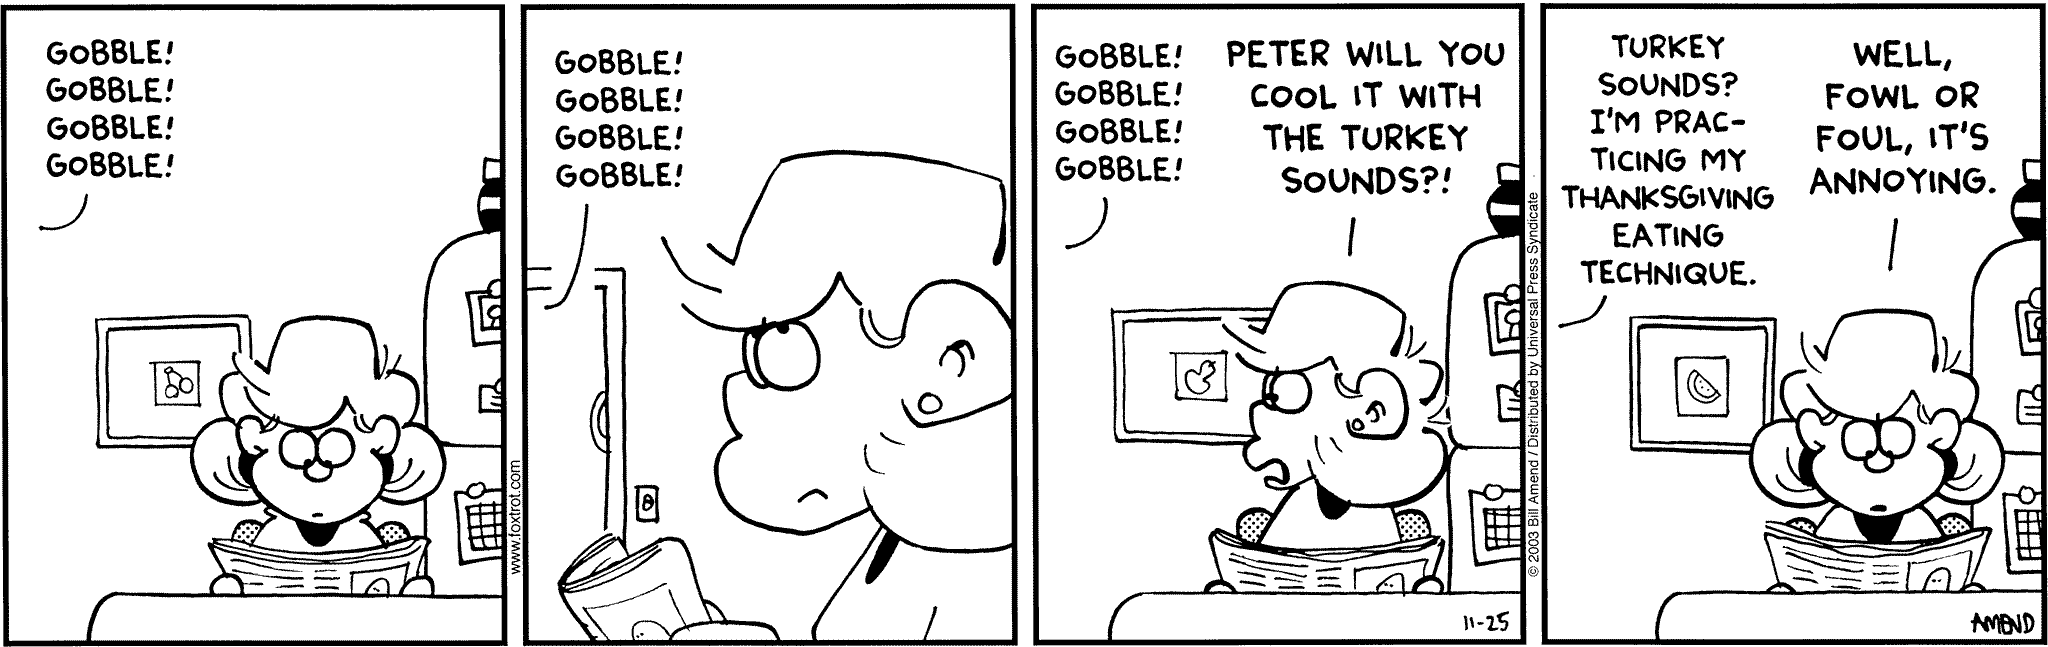 Thanksgiving Comics - FoxTrot comic strip by Bill Amend - Published November 25, 2003 - Transcript: Peter out of frame: Gobble! Gobbble! Gobble! Andy Fox: Peter will you cool it with the turkey sounds?! Peter Fox: Turkey sounds? I'm practicing my thanksgiving eating technique. Andy Fox: Well fowl or foul, it's annoying.